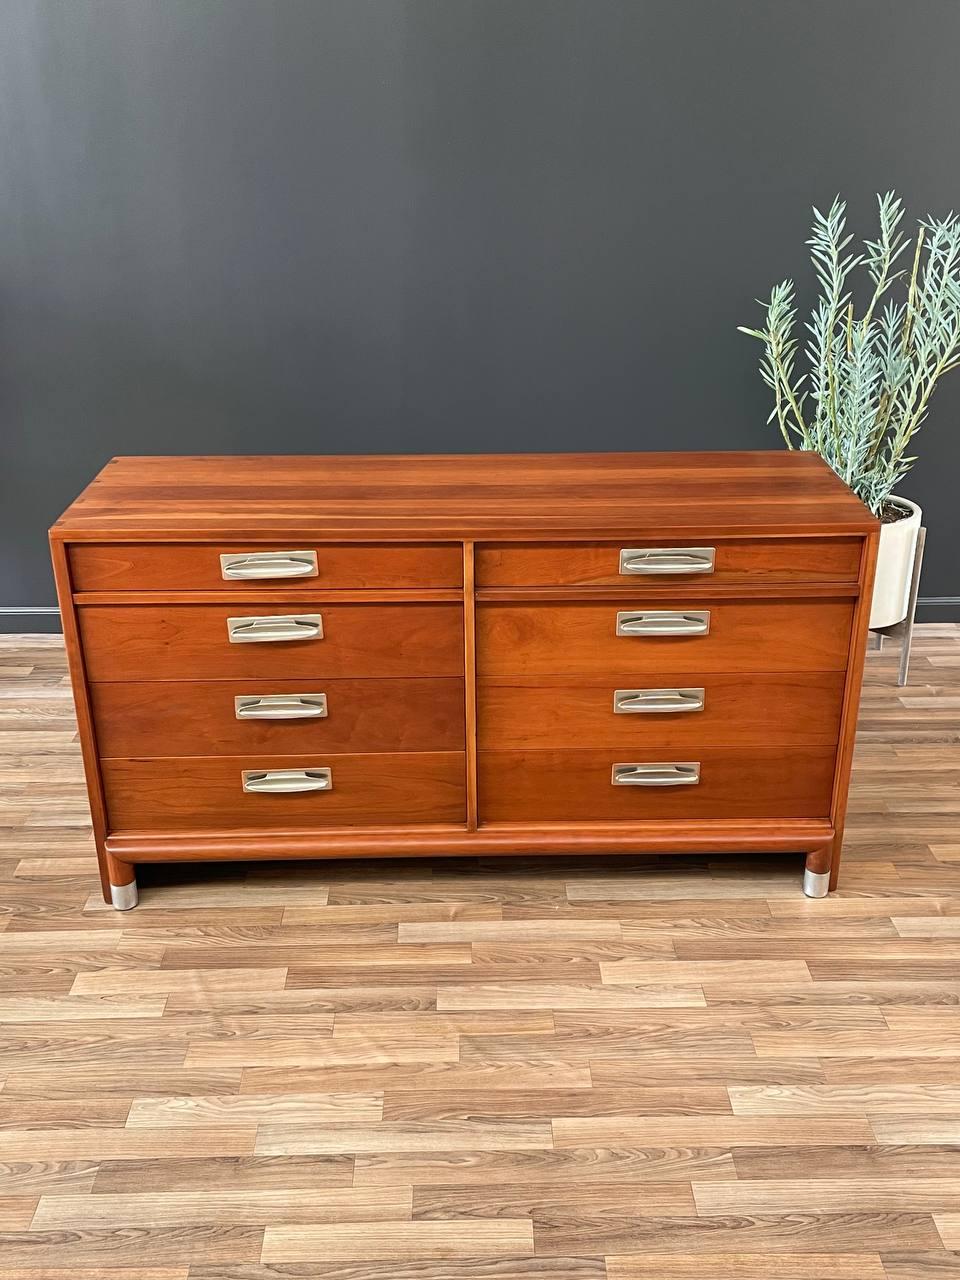 Newly Refinished - Mid-Century Modern Solid Cherry Dresser Willet Furniture In Excellent Condition For Sale In Los Angeles, CA